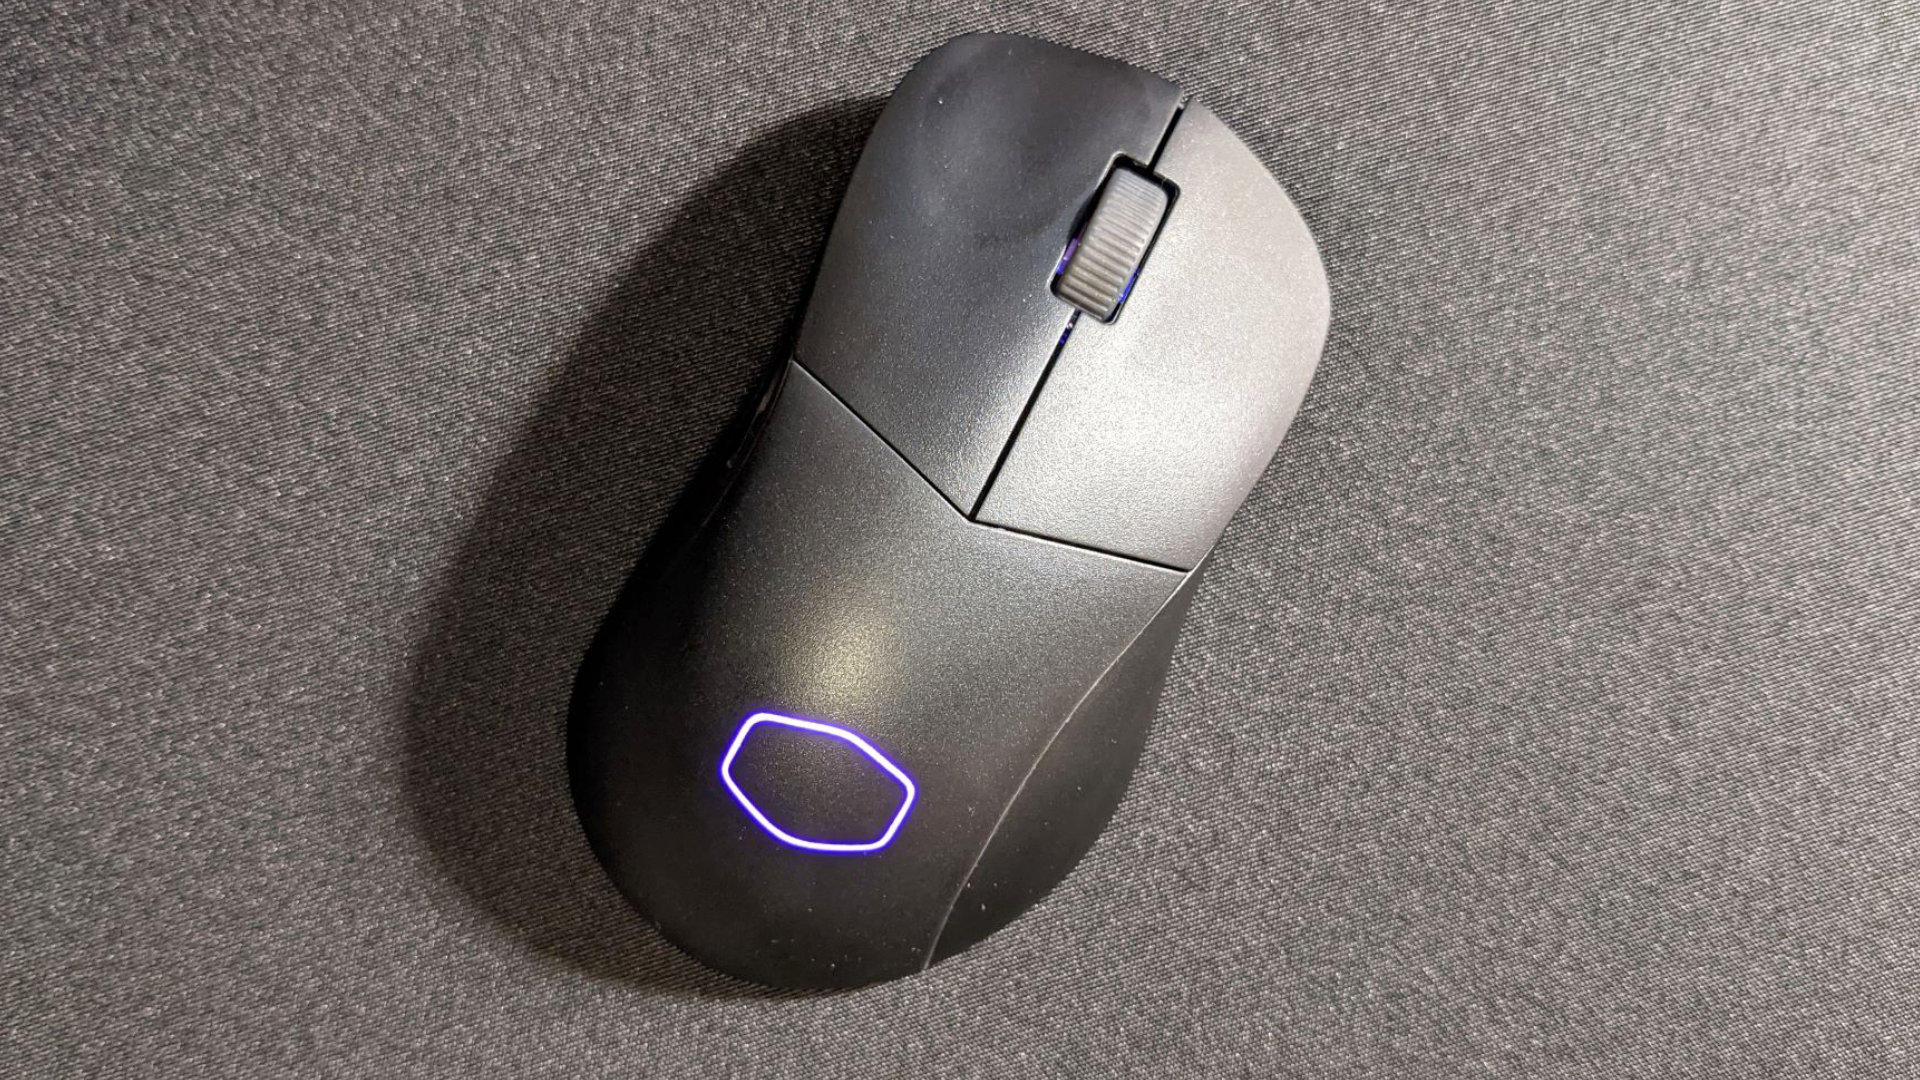 Best wireless gaming mouse in 2024